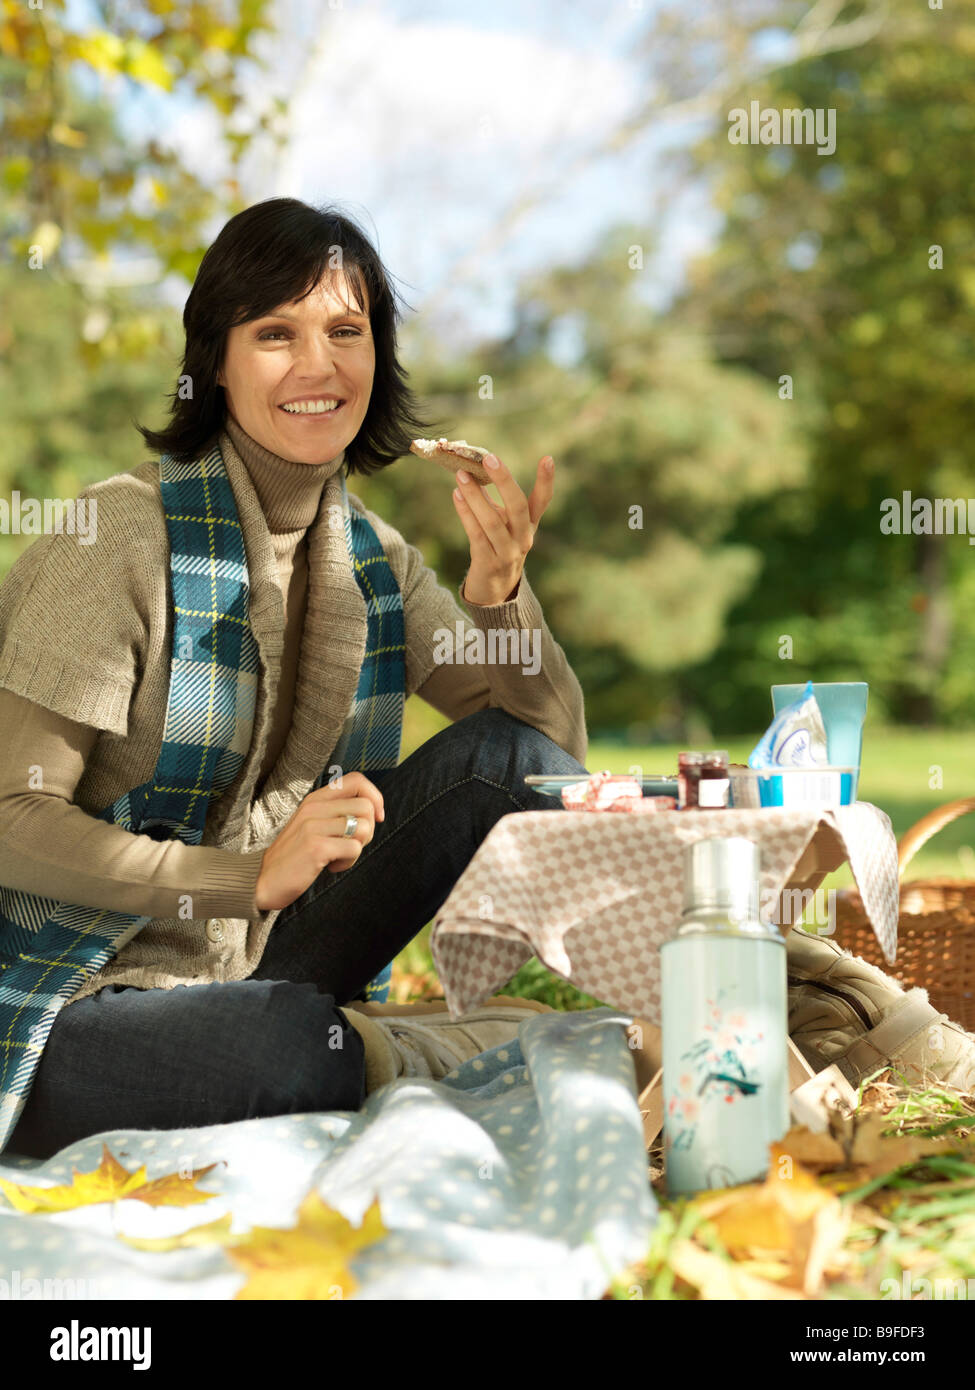 Portrait of mature woman holding slice of bread and smiling in park Stock Photo